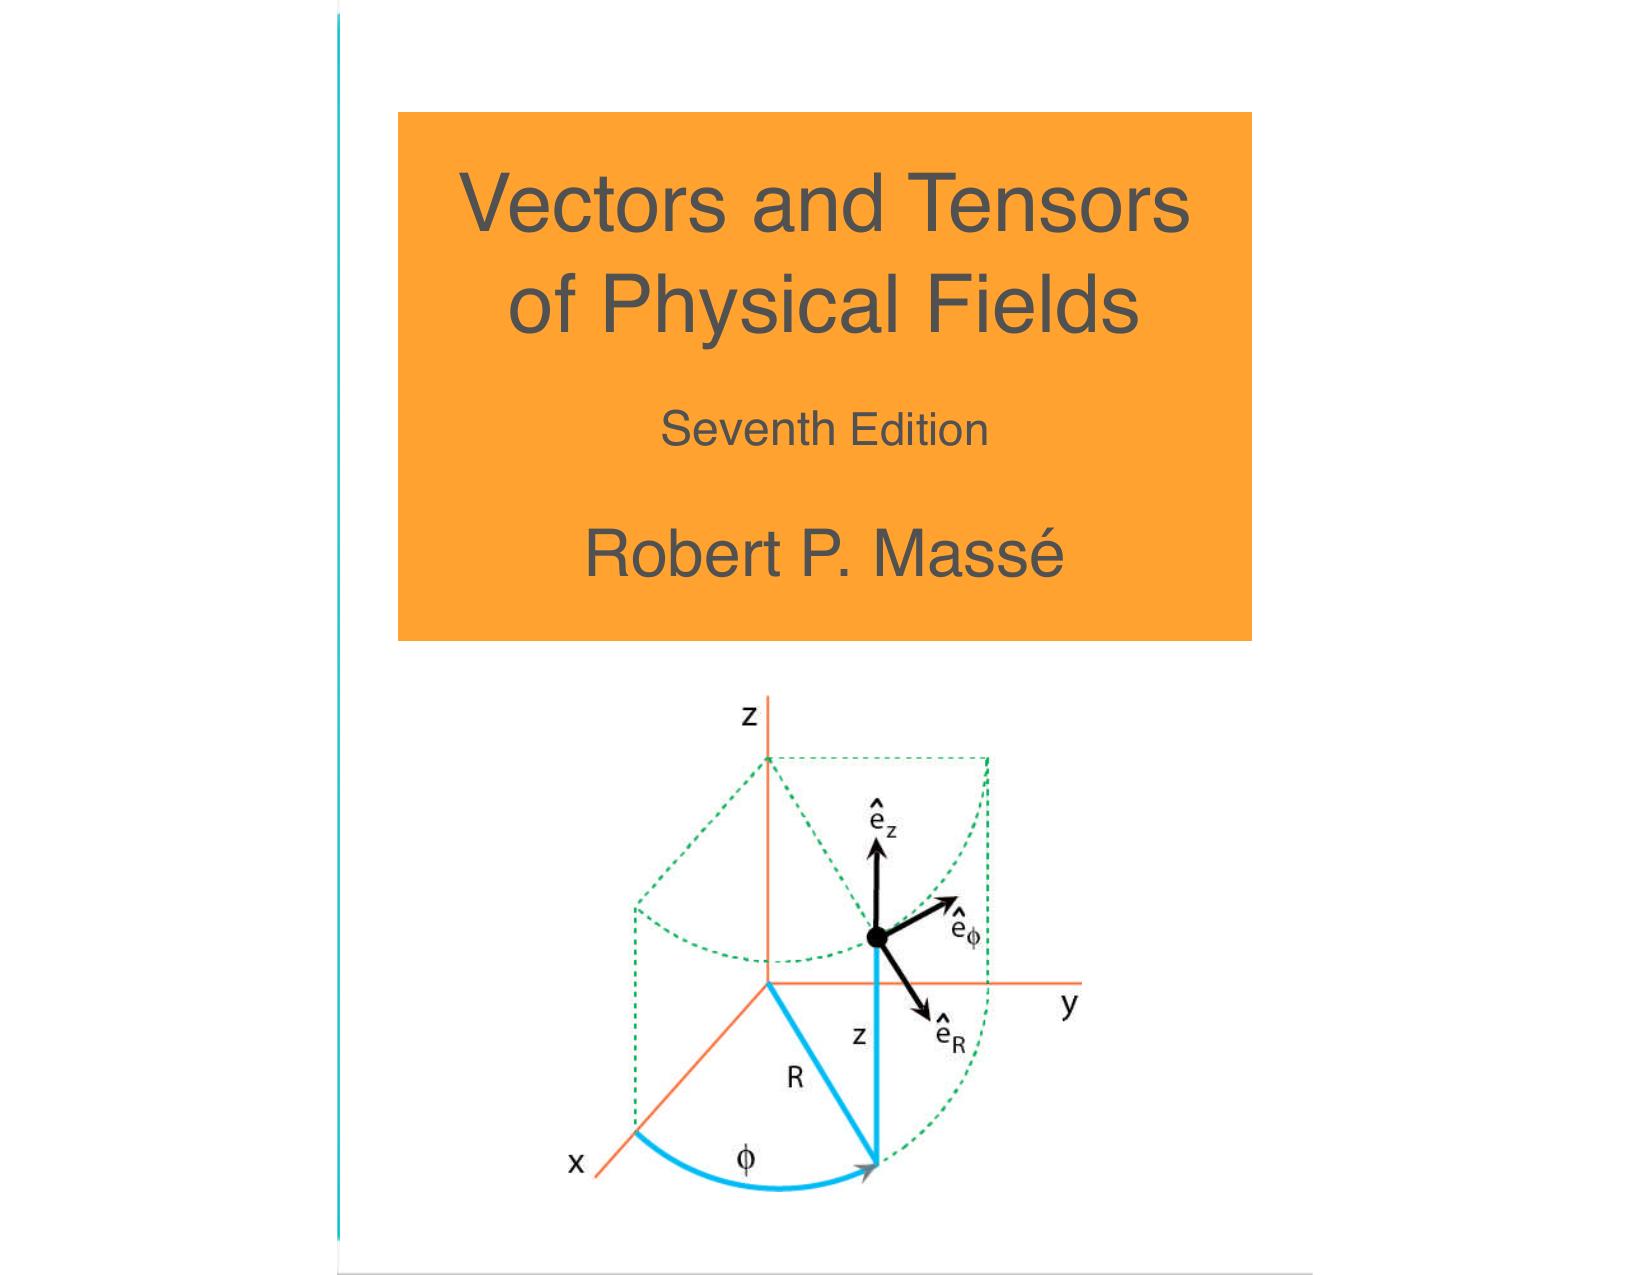 Vectors and Tensors of Physical Fields by Robert Masse